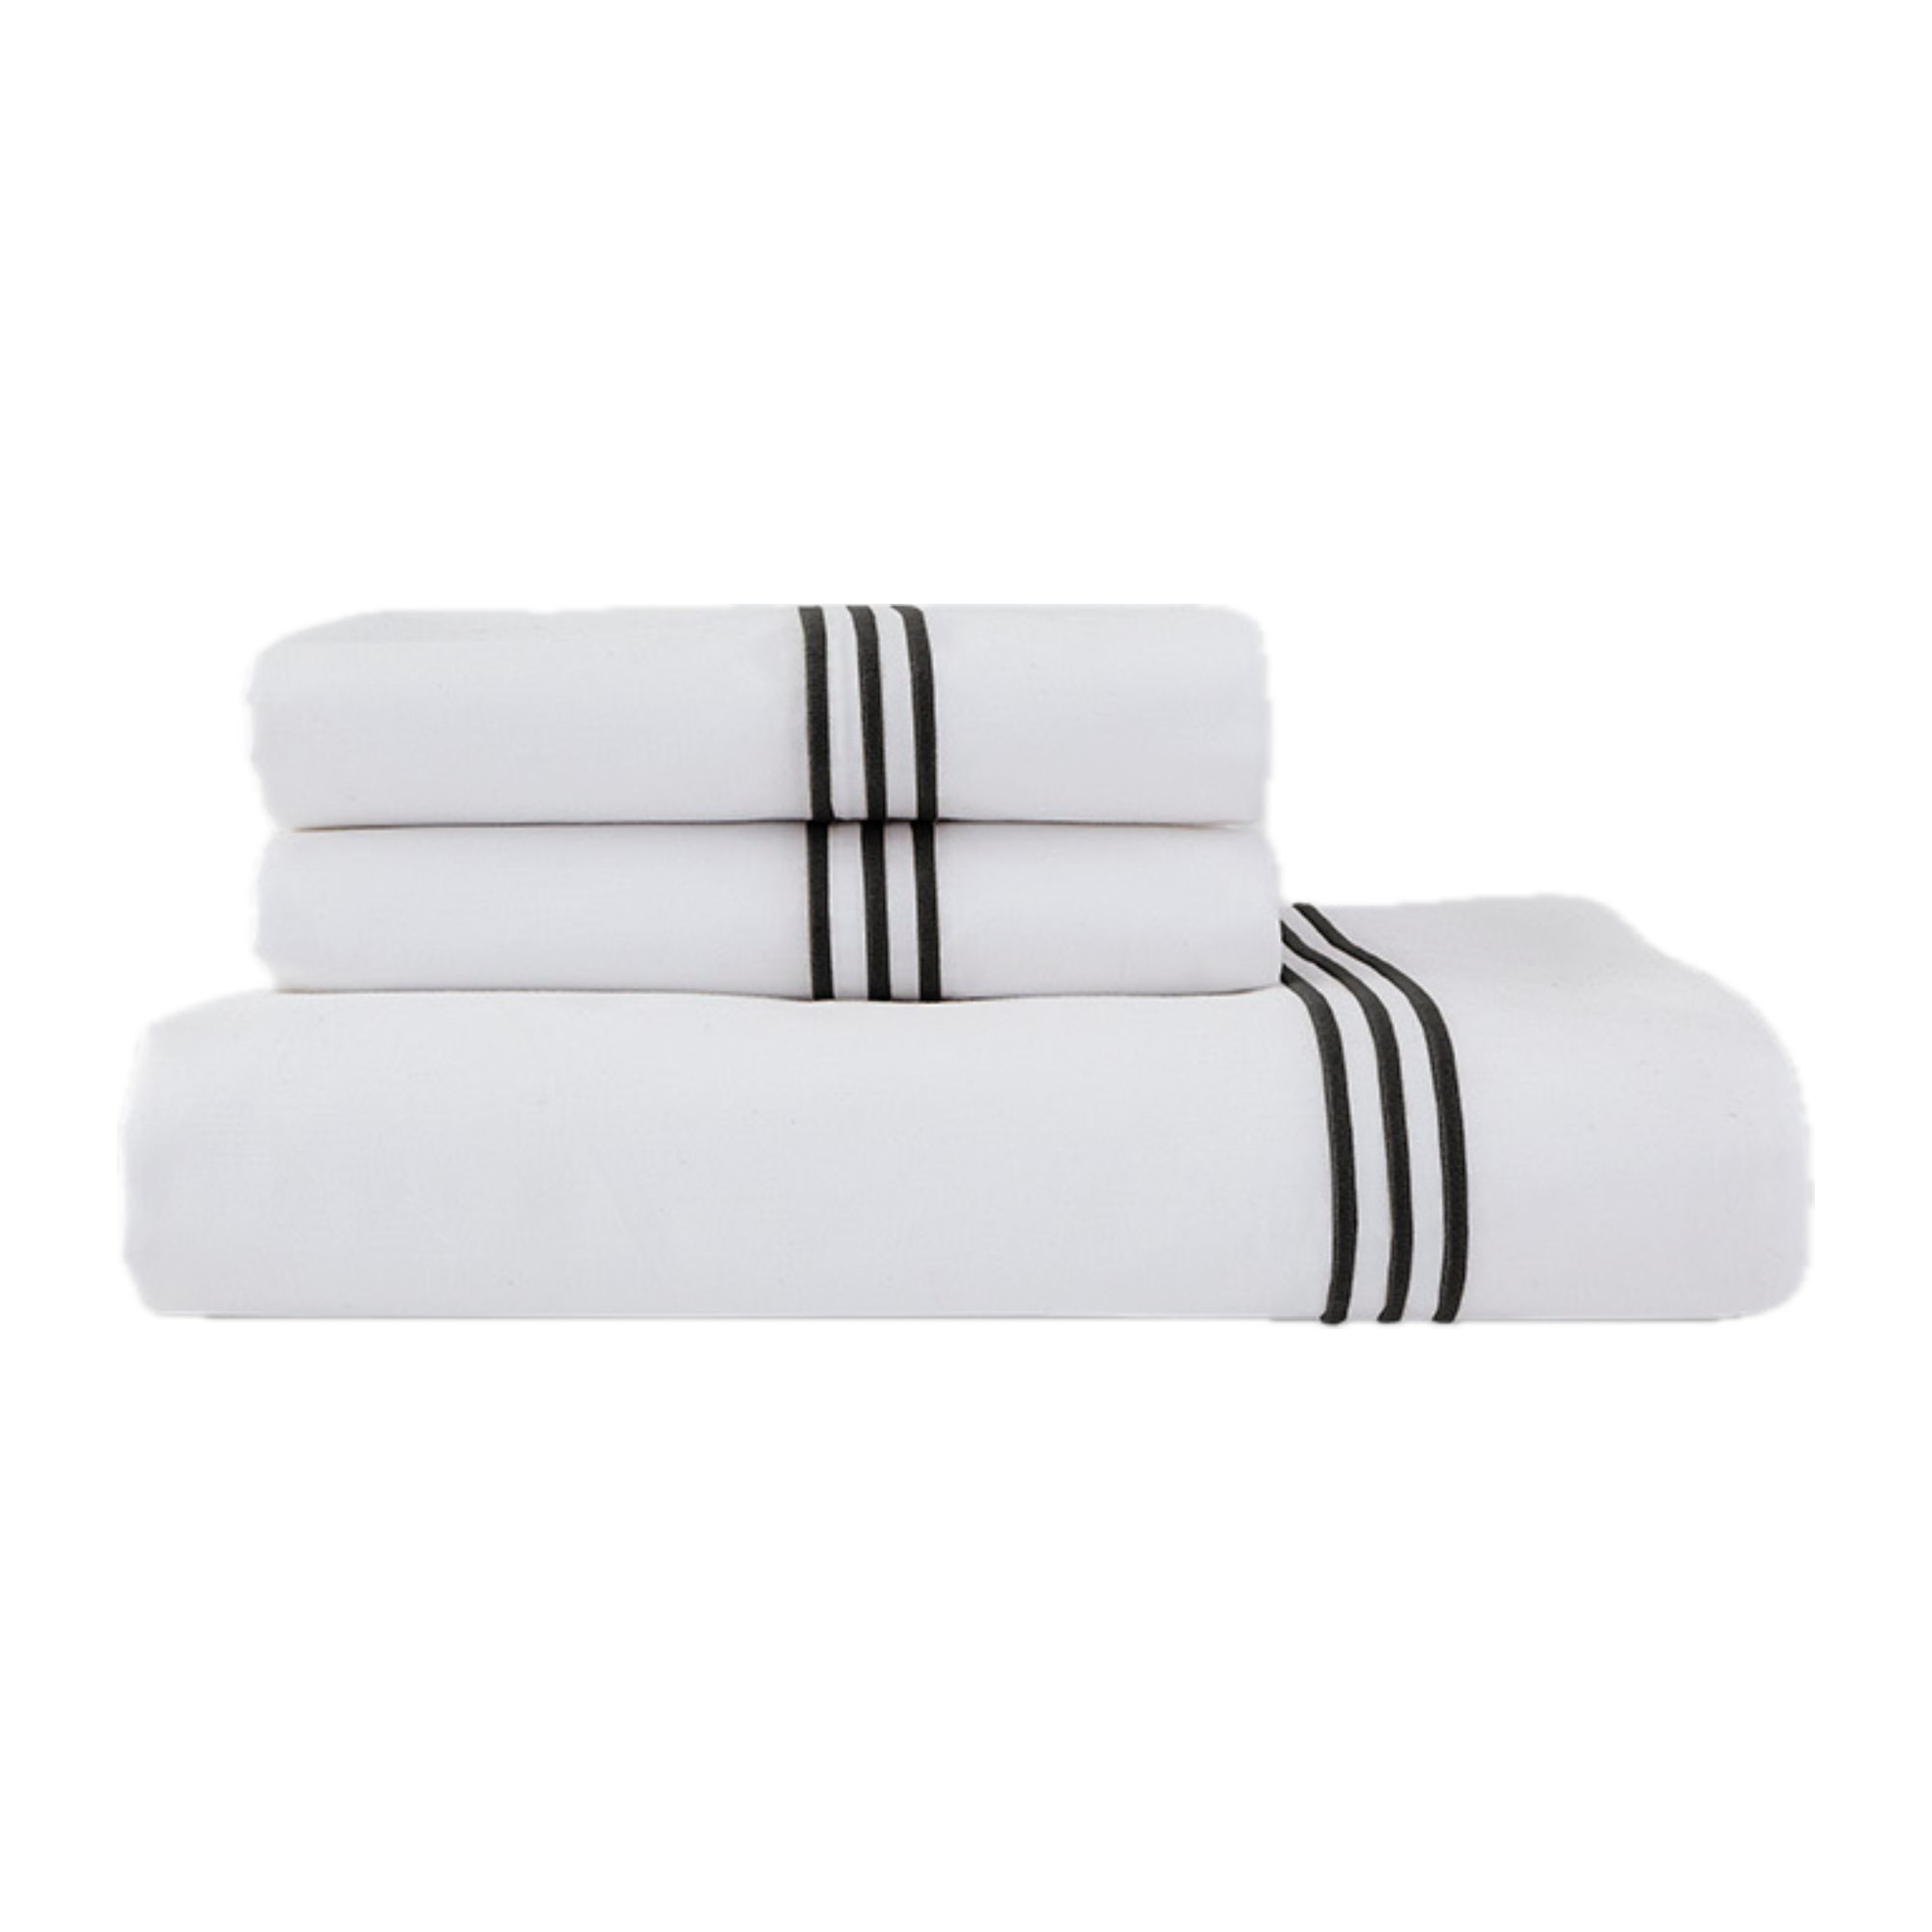 Sheet Set Stack of Downtown Company Madison Bedding Collection in Black Color